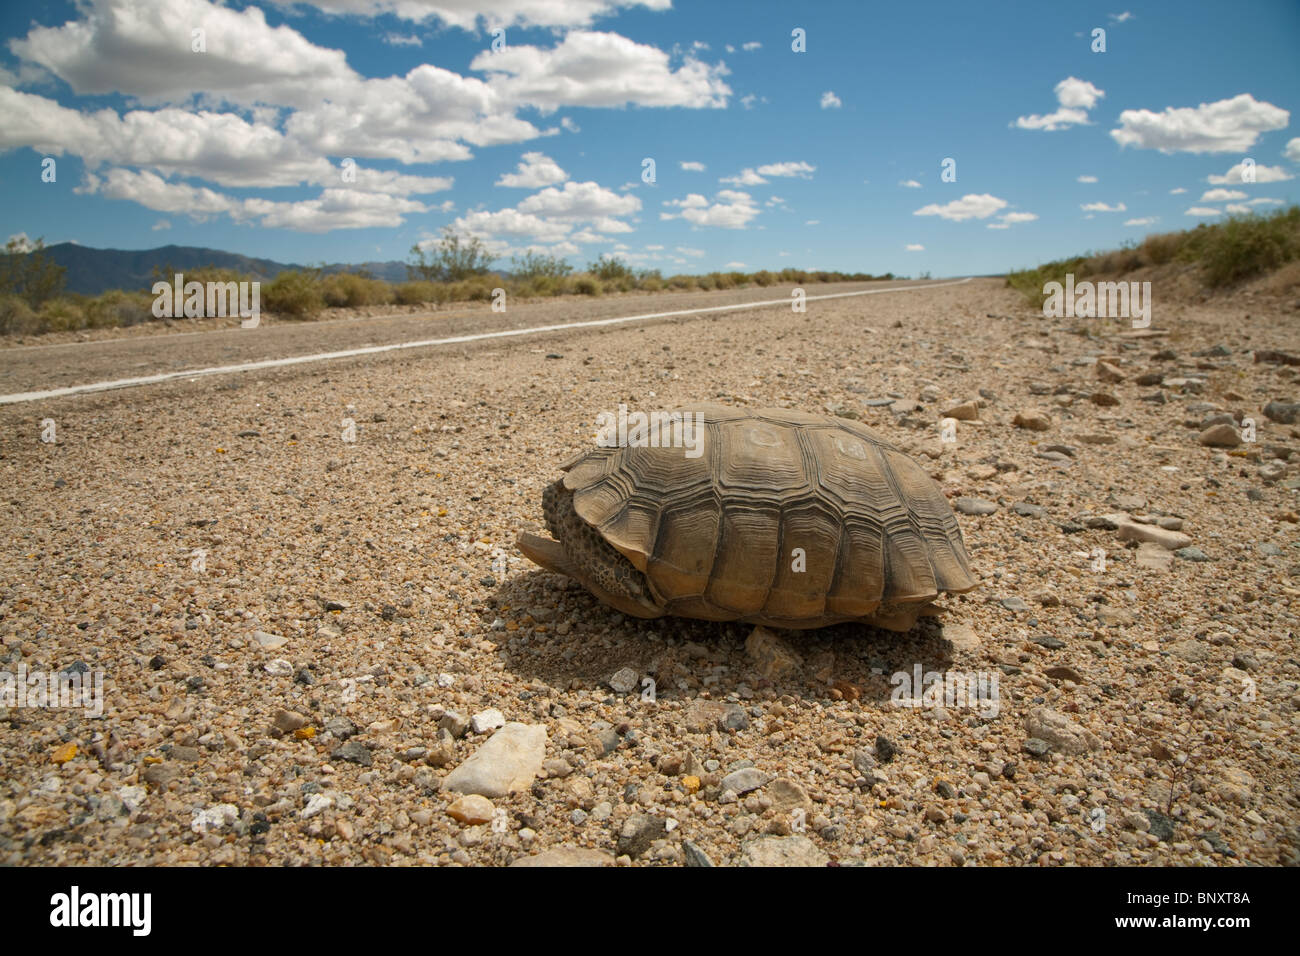 wild mojave desert tortoise Gopherus agassizii at the side of the road in the Mojave desert in California USA Stock Photo